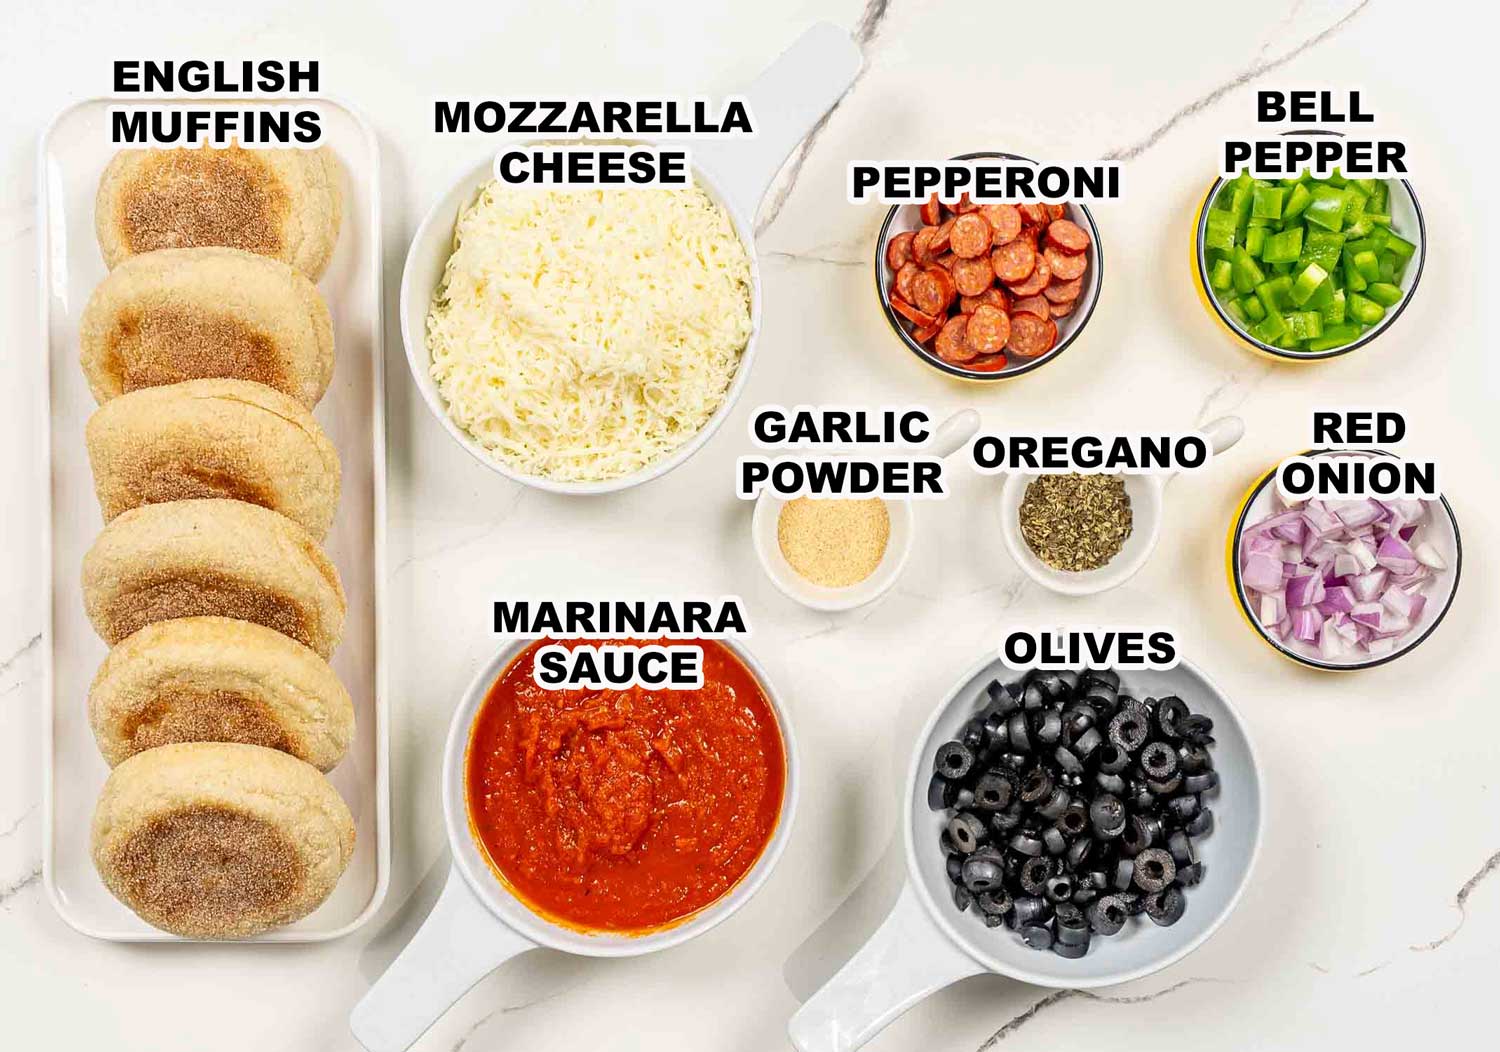 ingredients needed to make english muffin pizza.